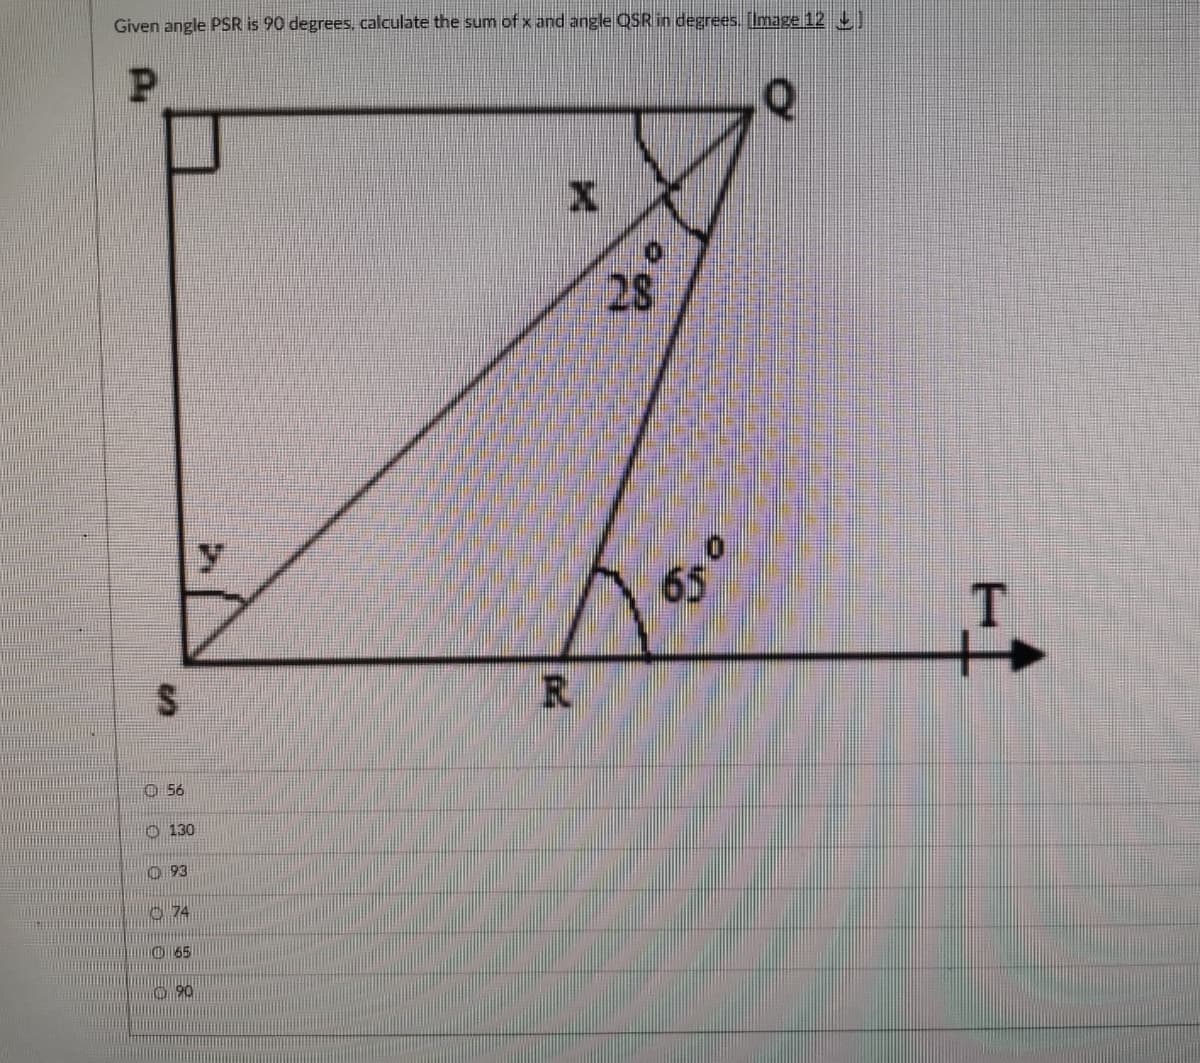 Given angle PSR is 90 degrees, calculate the sum of x and angle QSR in degrees. (Image 12 ]
28
65
O 56
130
O 93
74
O 65
90
